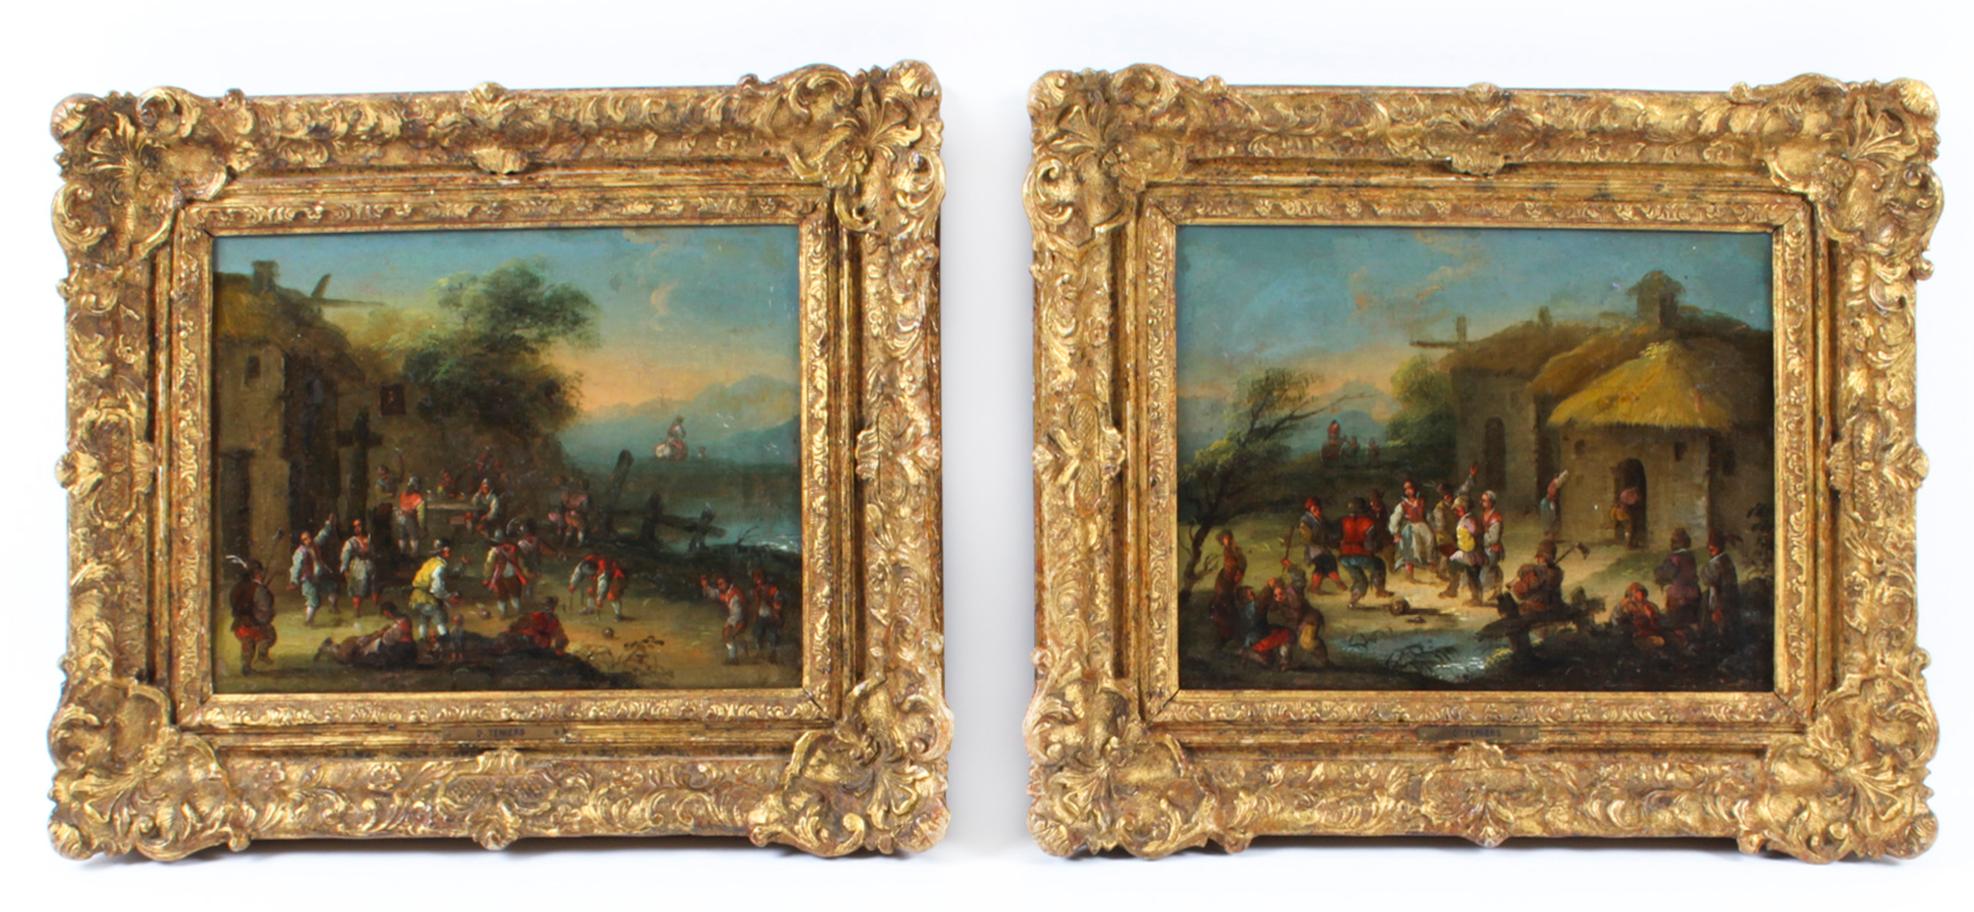 A lovely pair of Flemish oil on board framed paintings in the Manner of David Teniers, late 18th century in date.
The paintings delightfully present two compositions with Musketeers and townfolk in period costumes merrymaking outside a tavern in a